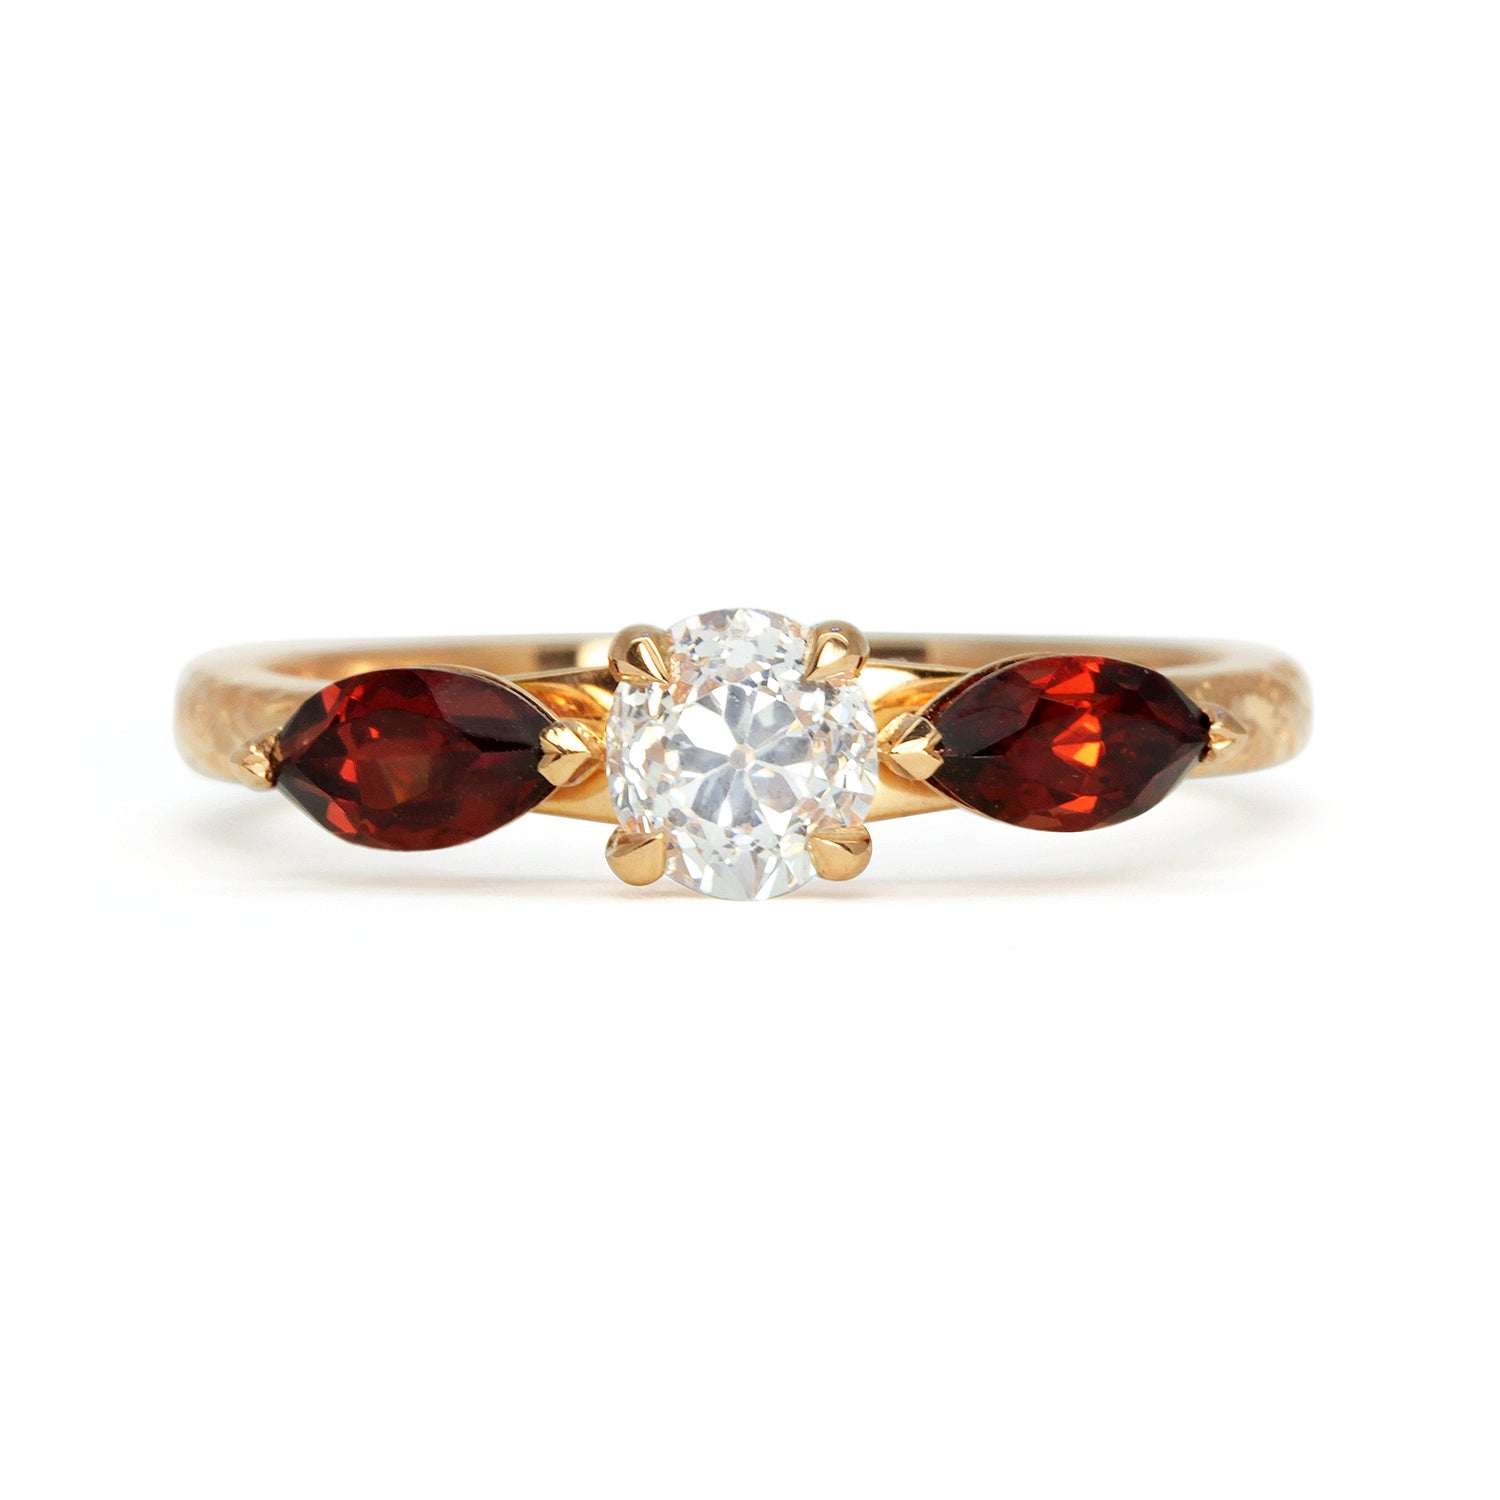 Bespoke Craig ethical trilogy engagement ring, recycled old-cut diamond, fair-traded and conflict-free marquise-cut garnets and 18ct rose Fairmined Ecological Gold